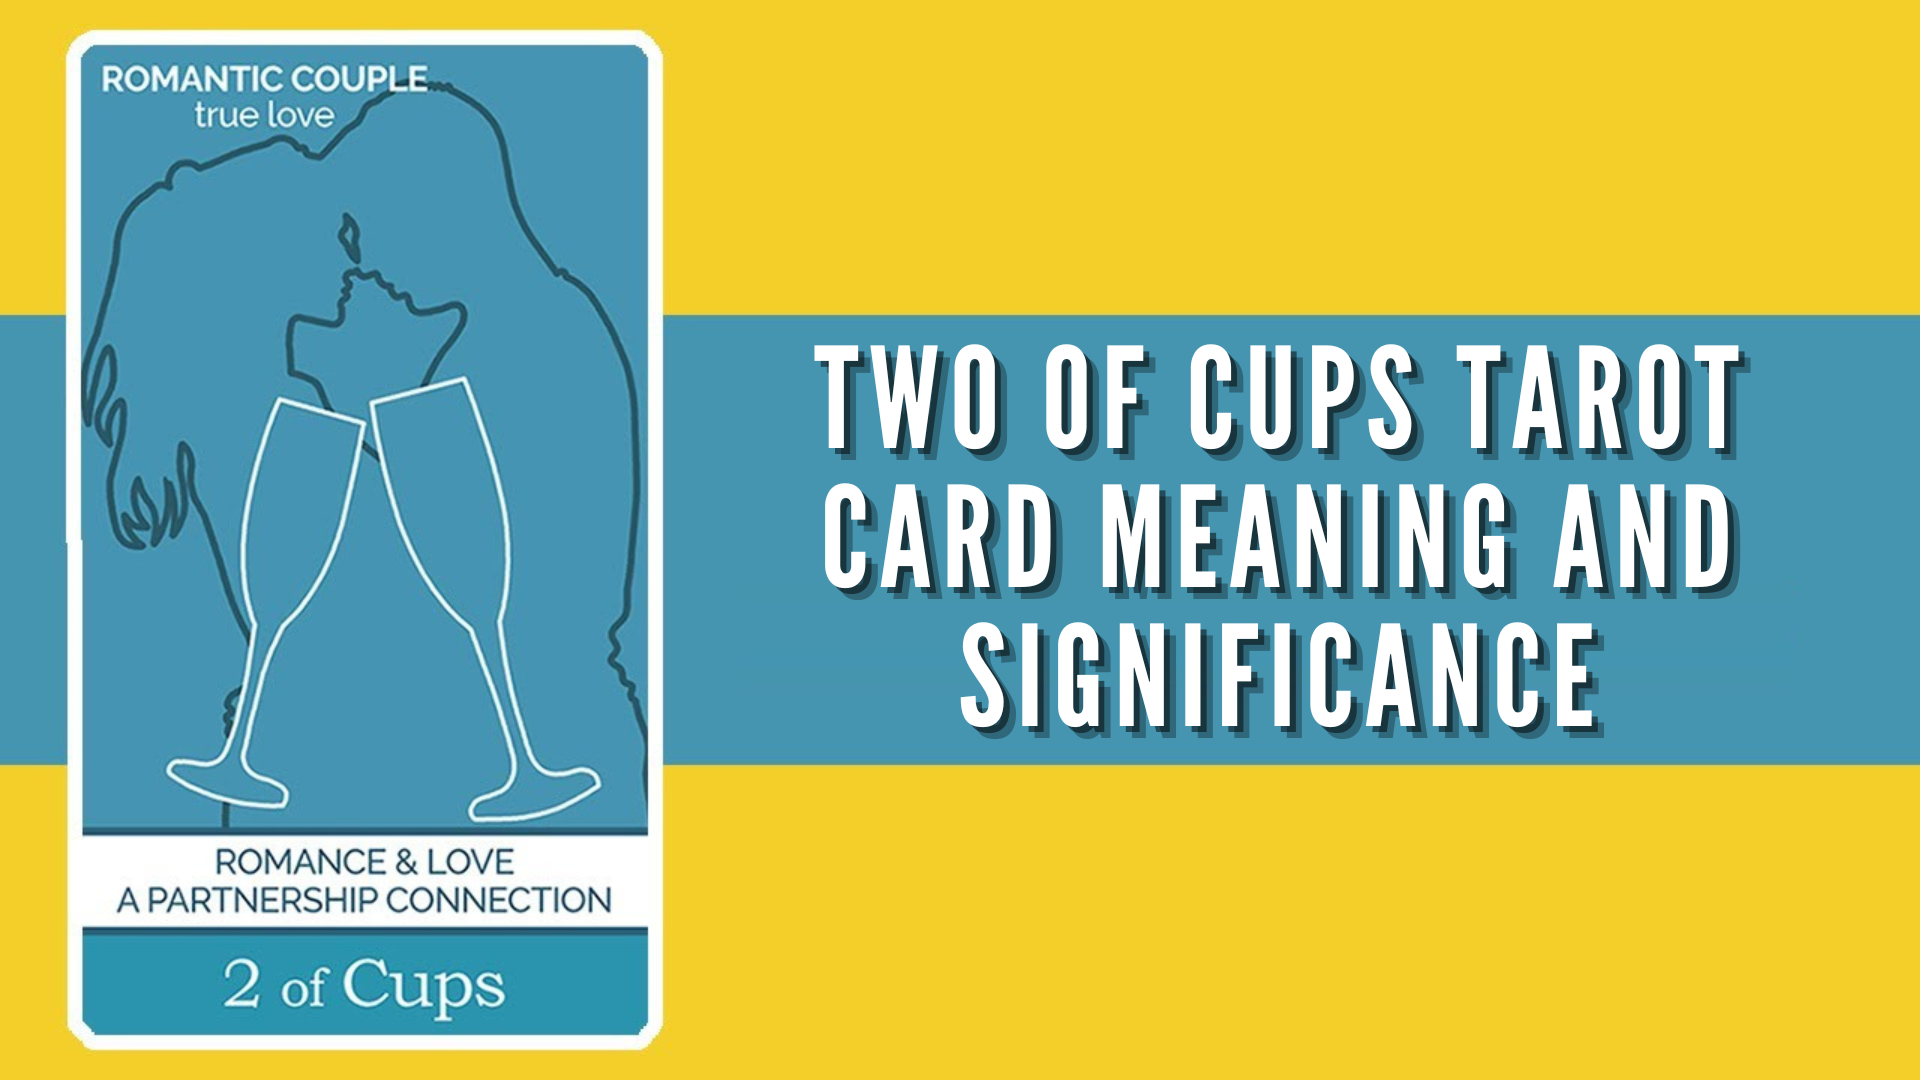 Two Of Cups Tarot Card on the left with words Two Of Cups Tarot Card Meaning And Significance